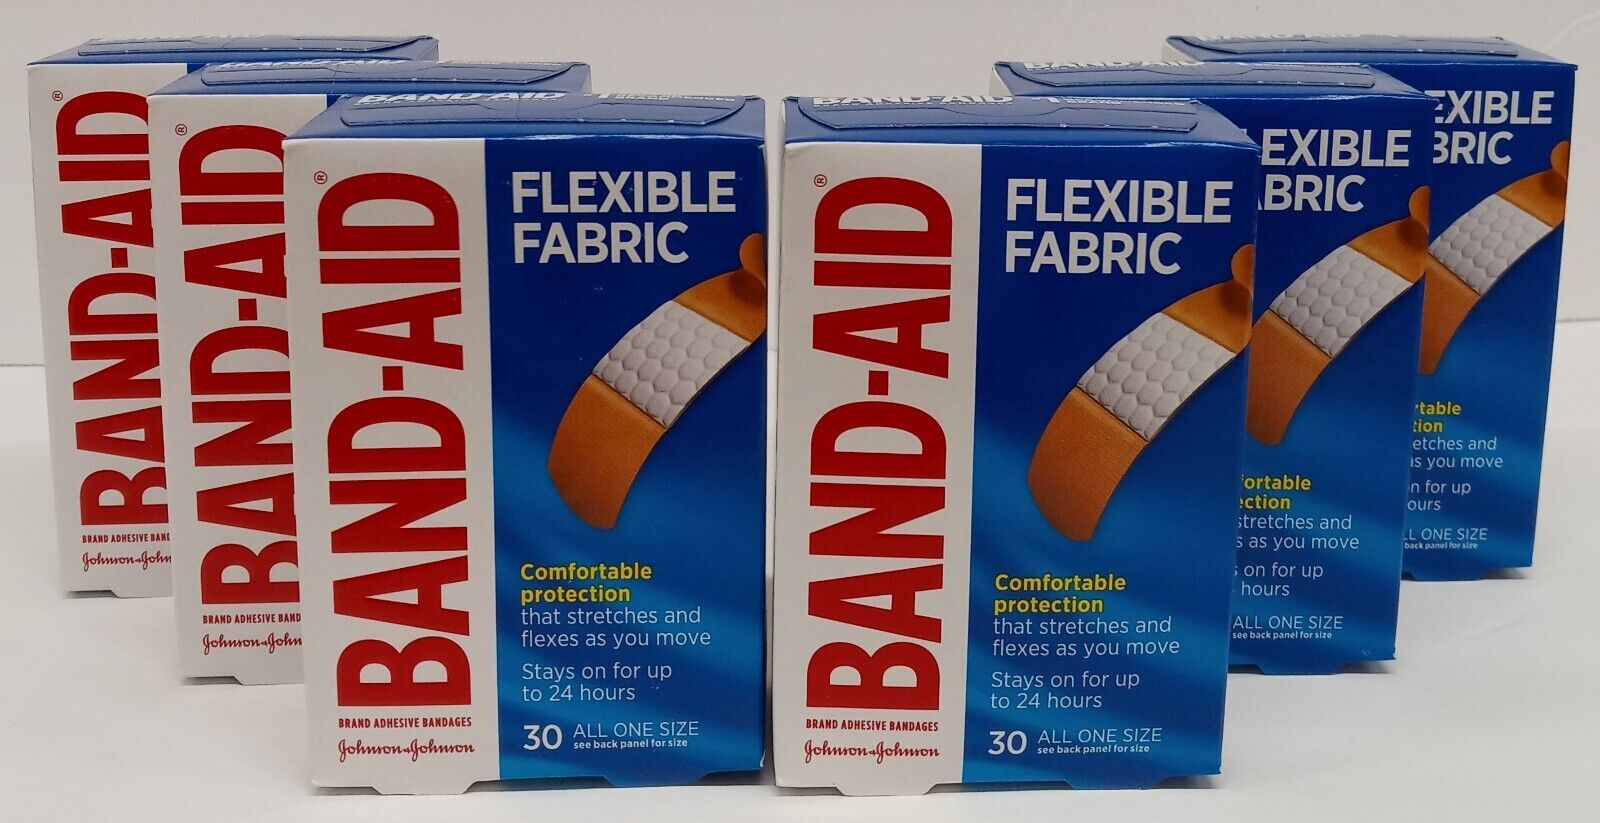 Lot of 6 Band-Aid Bandages Flexible Fabric 30 count  All 1 Size 3/4 in x 3 in  Bandaid